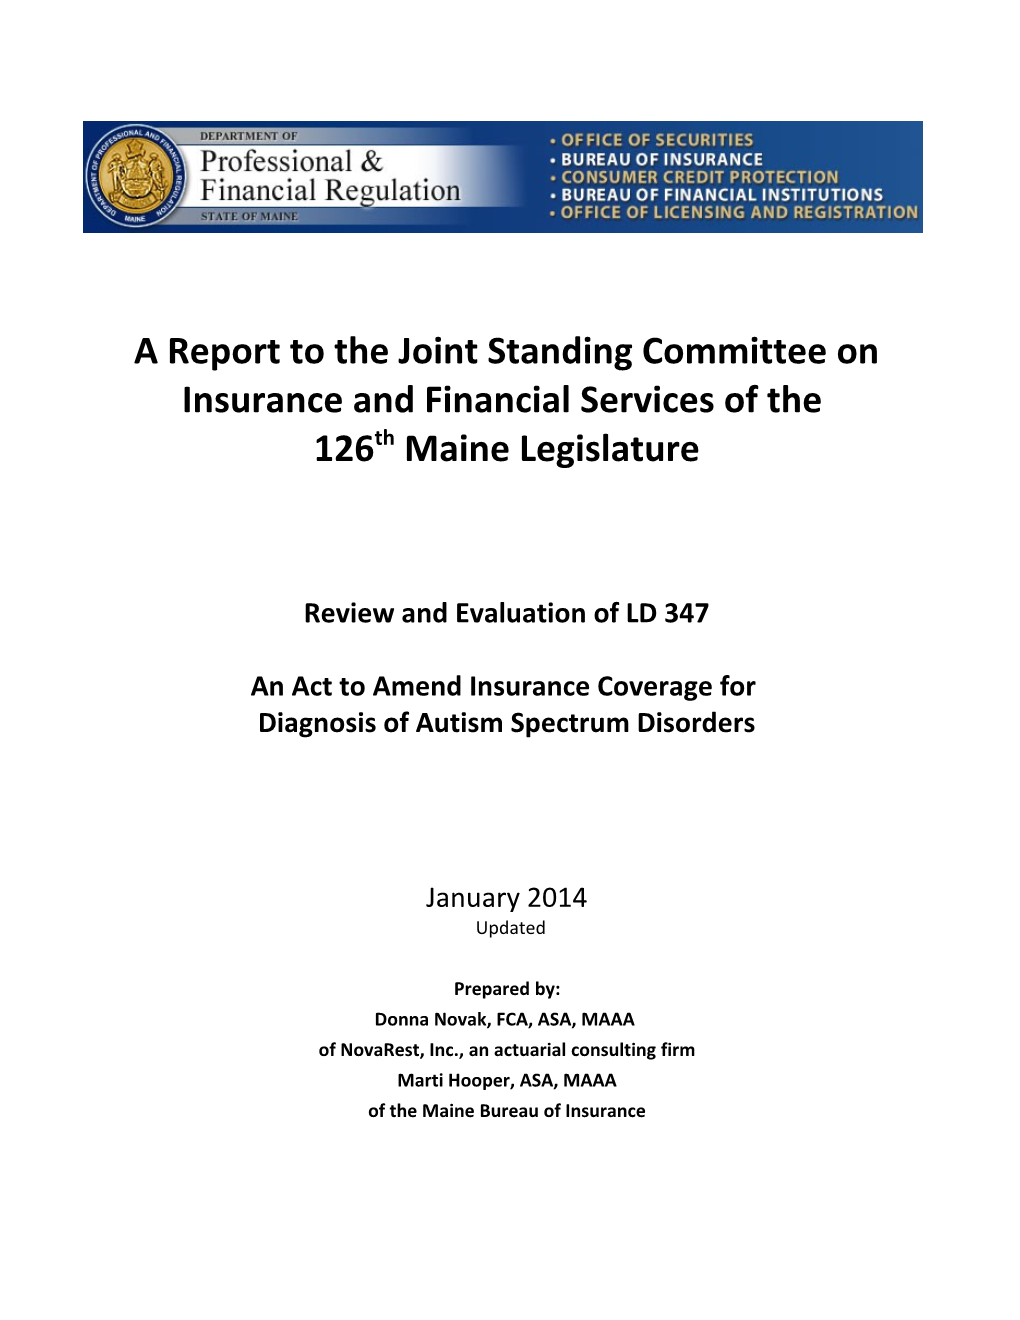 A Report to the Joint Standing Committee on Insurance and Financial Services of The